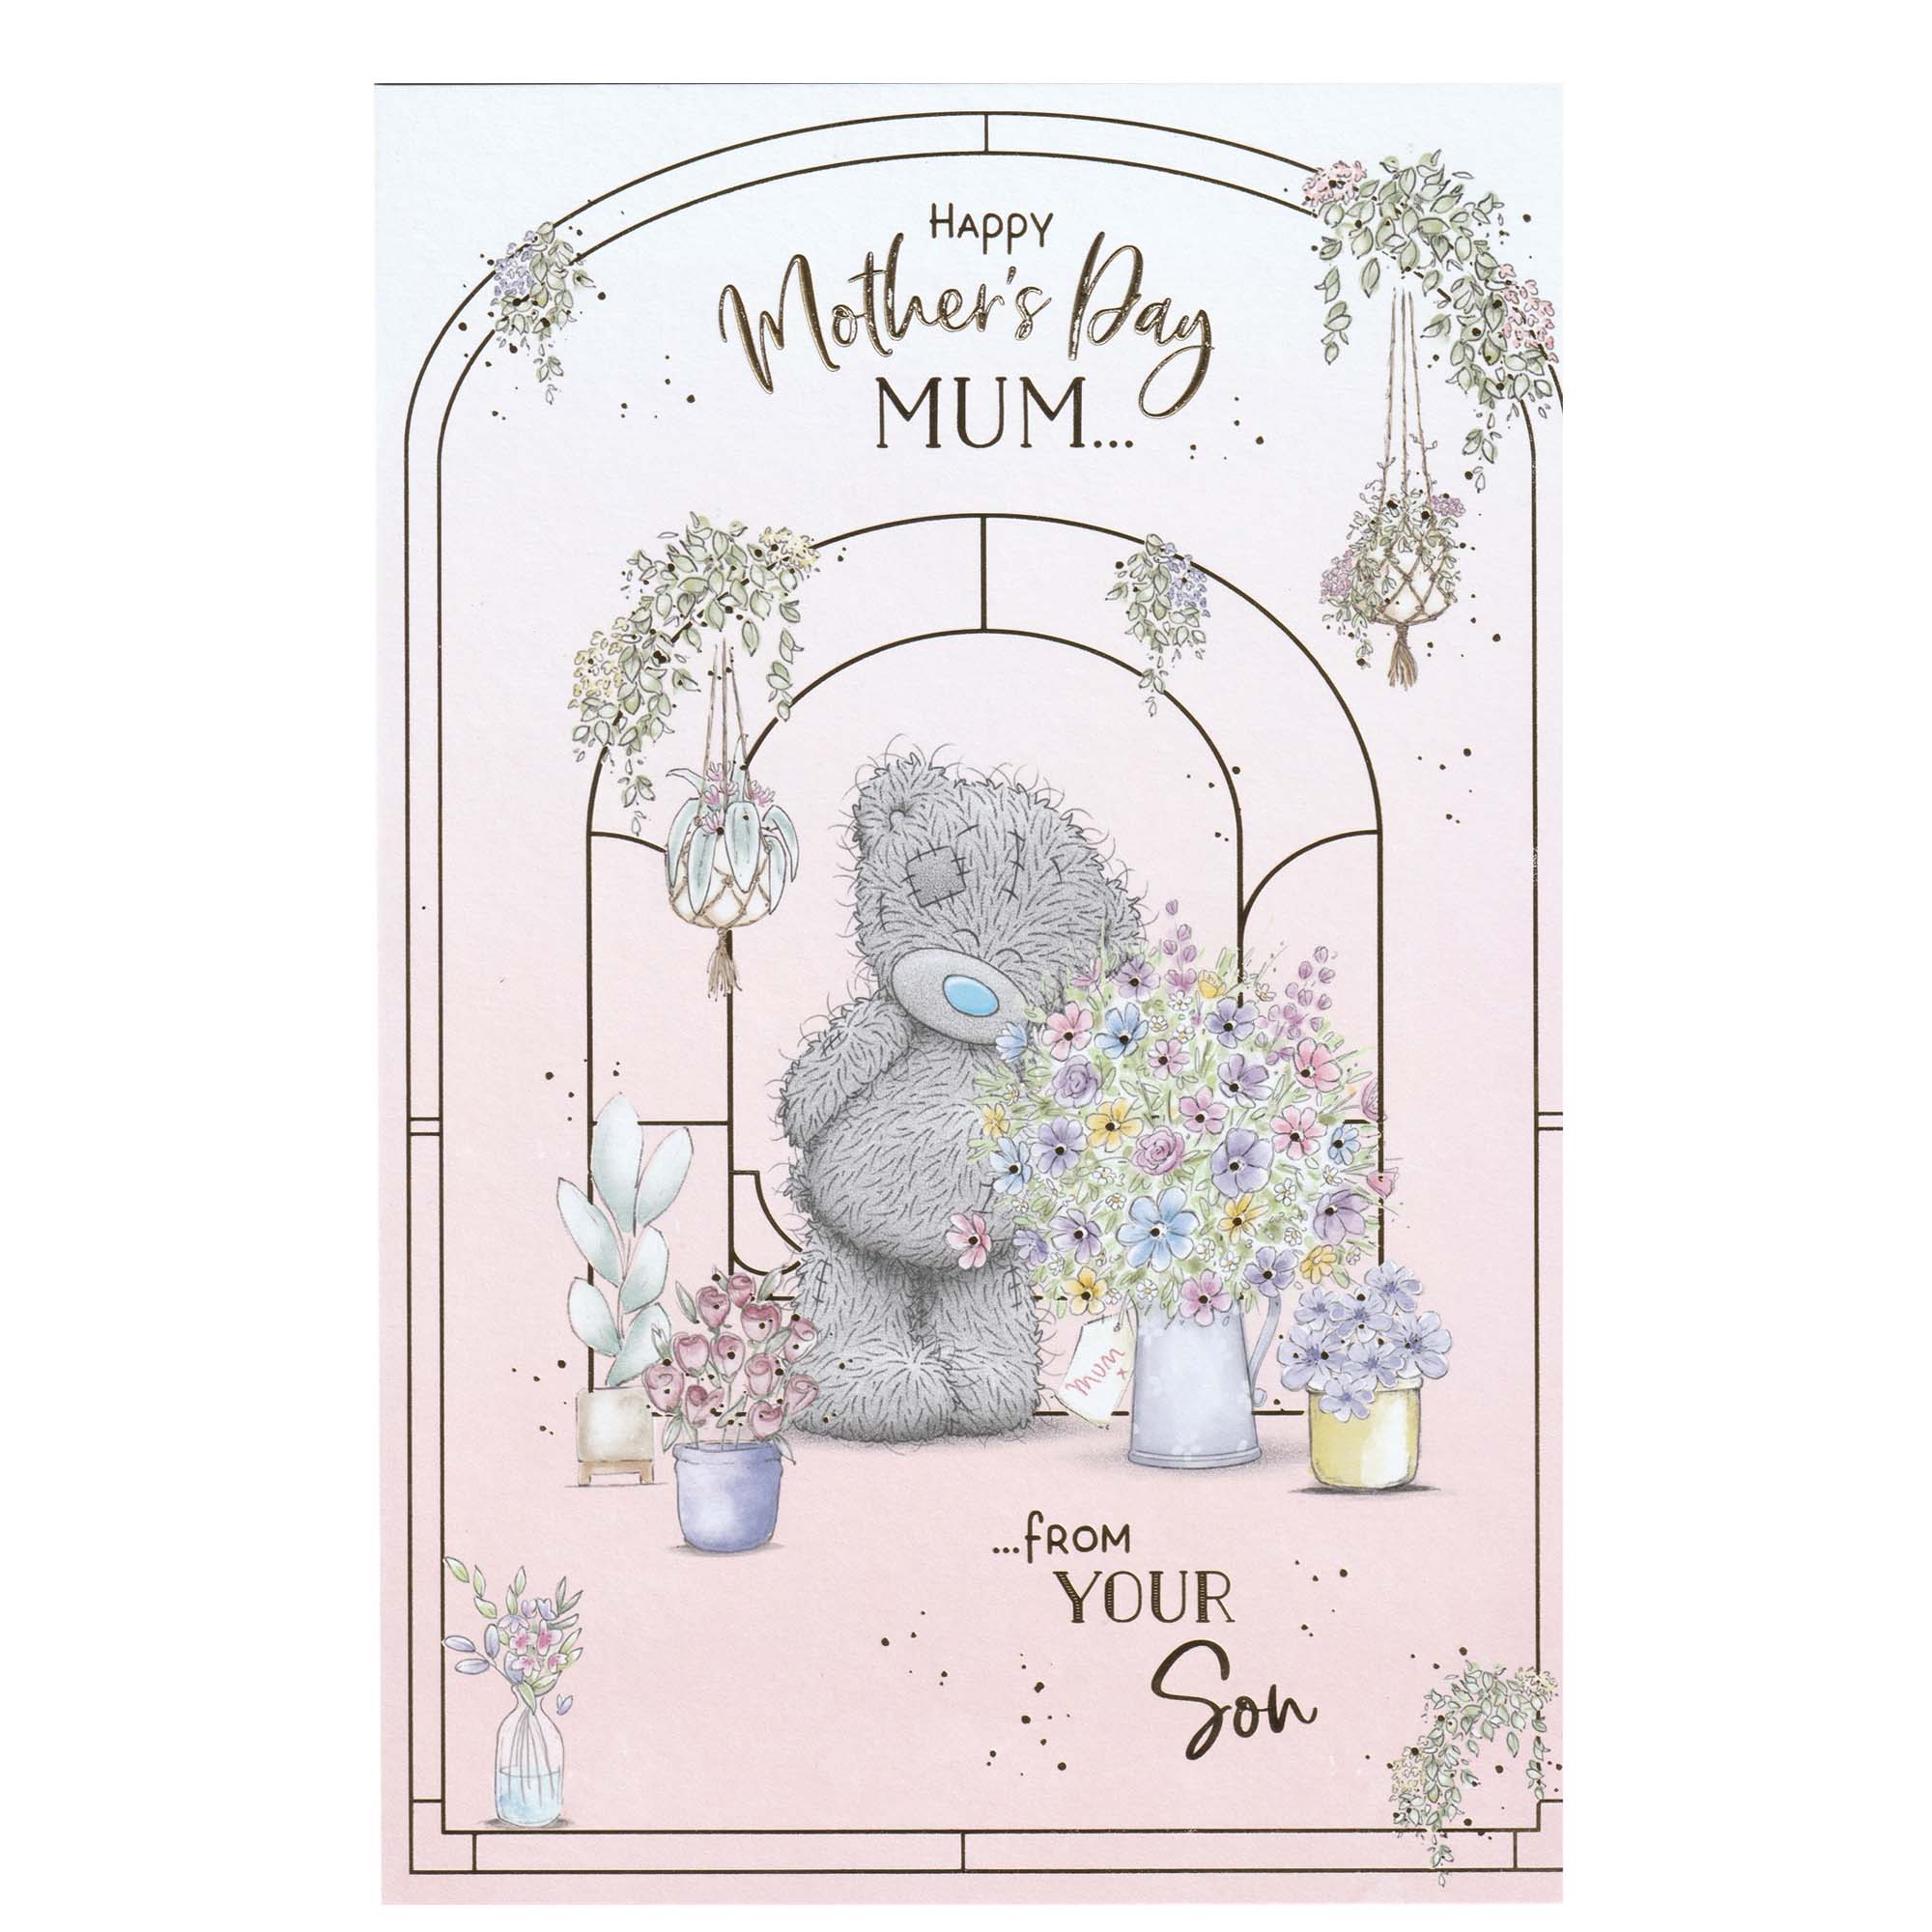 Happy Mothers Day Mum From Your Son Greeting Card